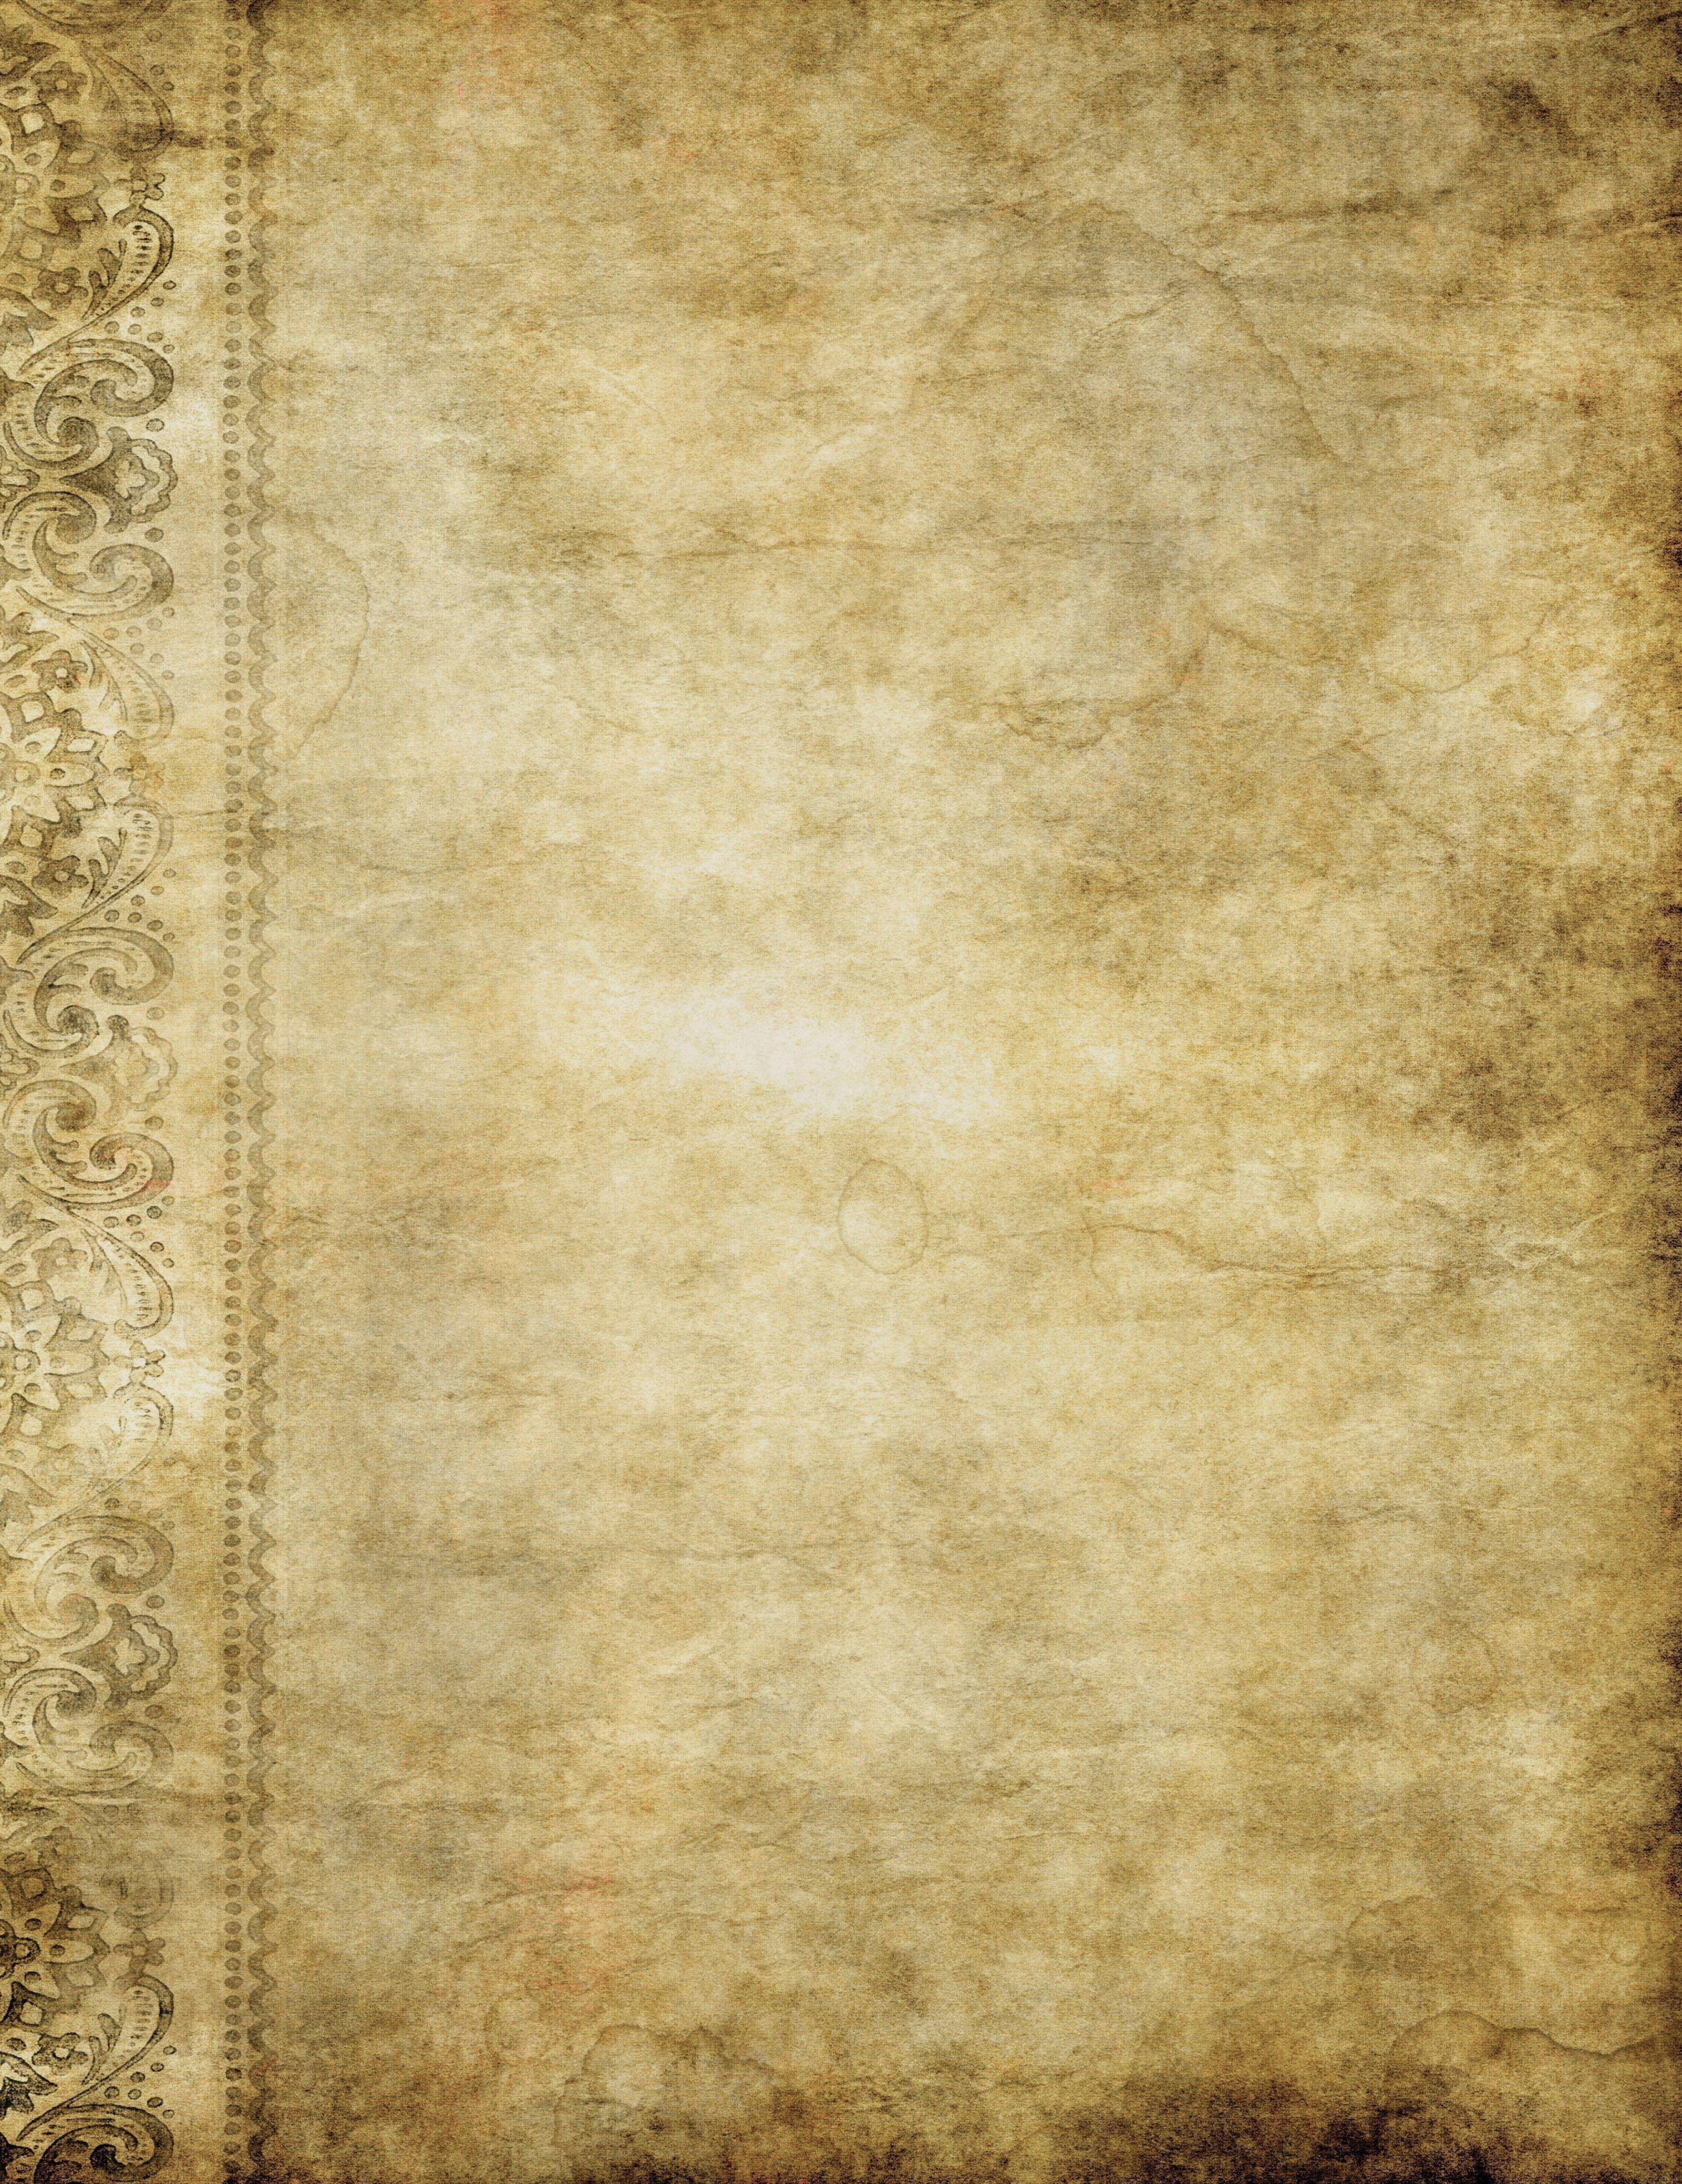 another free paper texture or parchment background image. Old